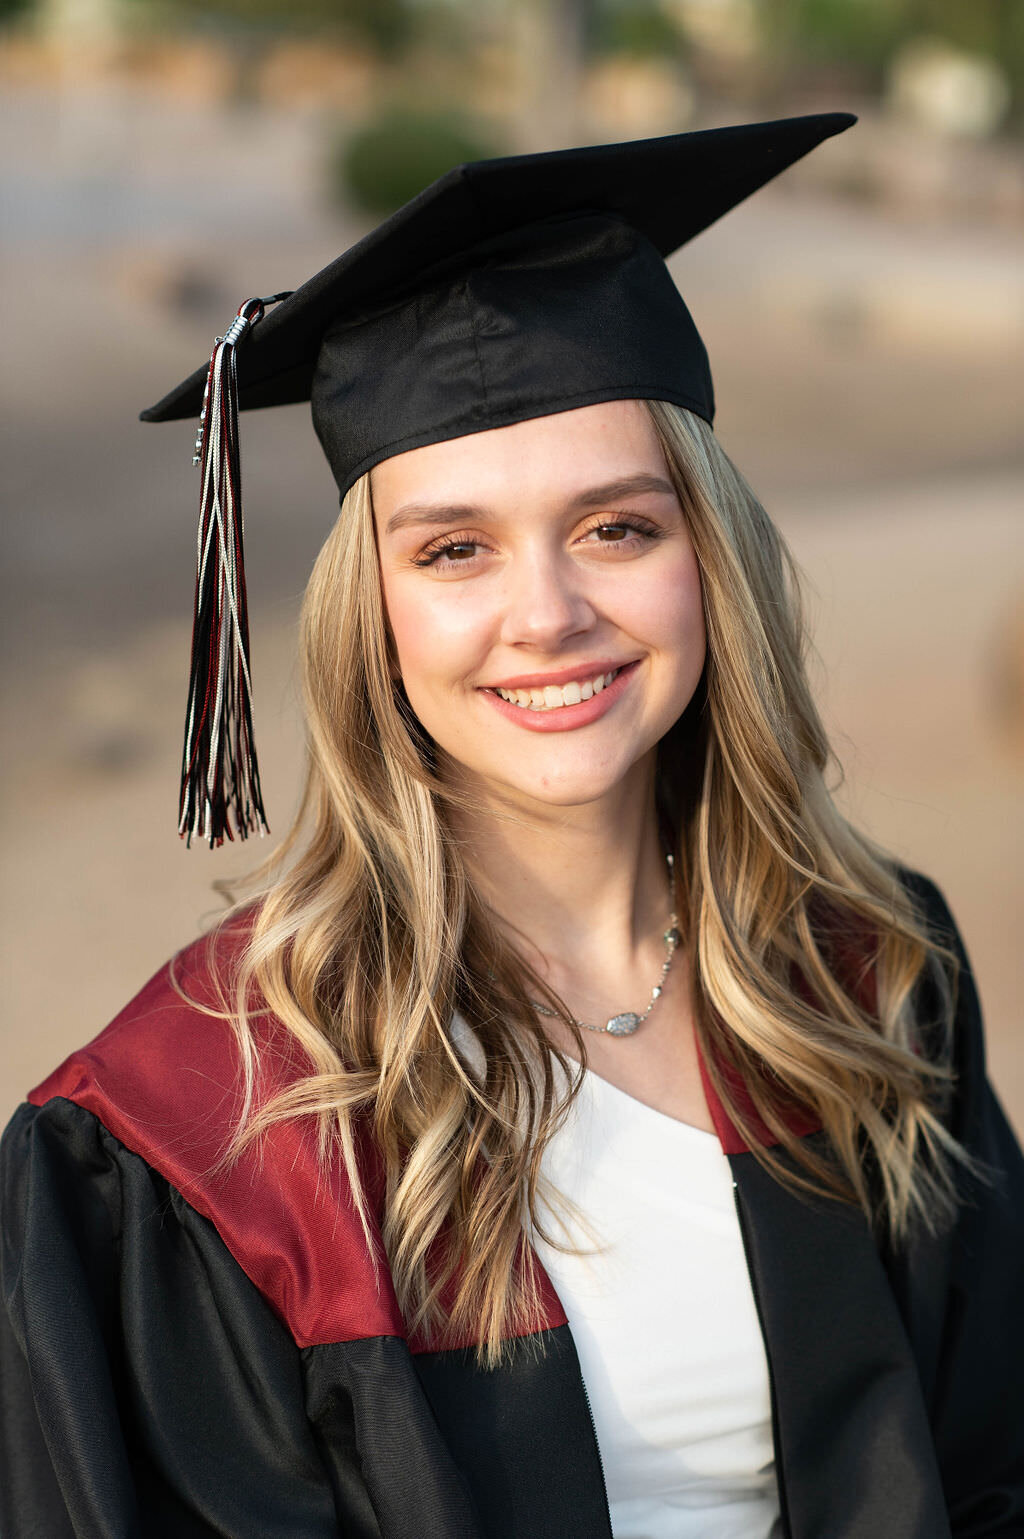 A girl in a graduation cap and gown smiling.